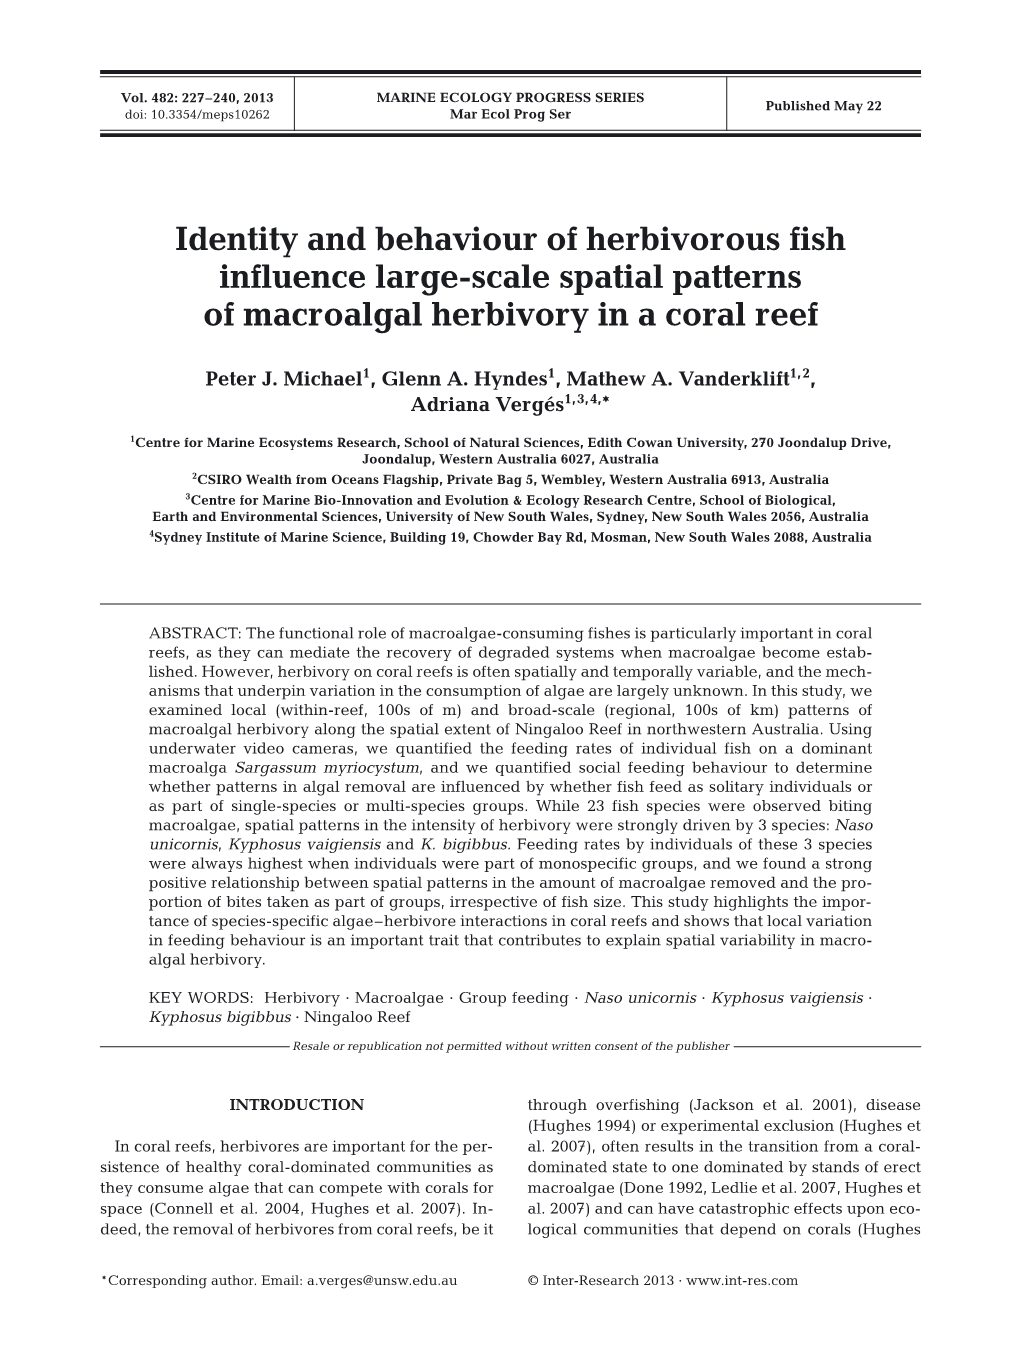 Identity and Behaviour of Herbivorous Fish Influence Large-Scale Spatial Patterns of Macroalgal Herbivory in a Coral Reef